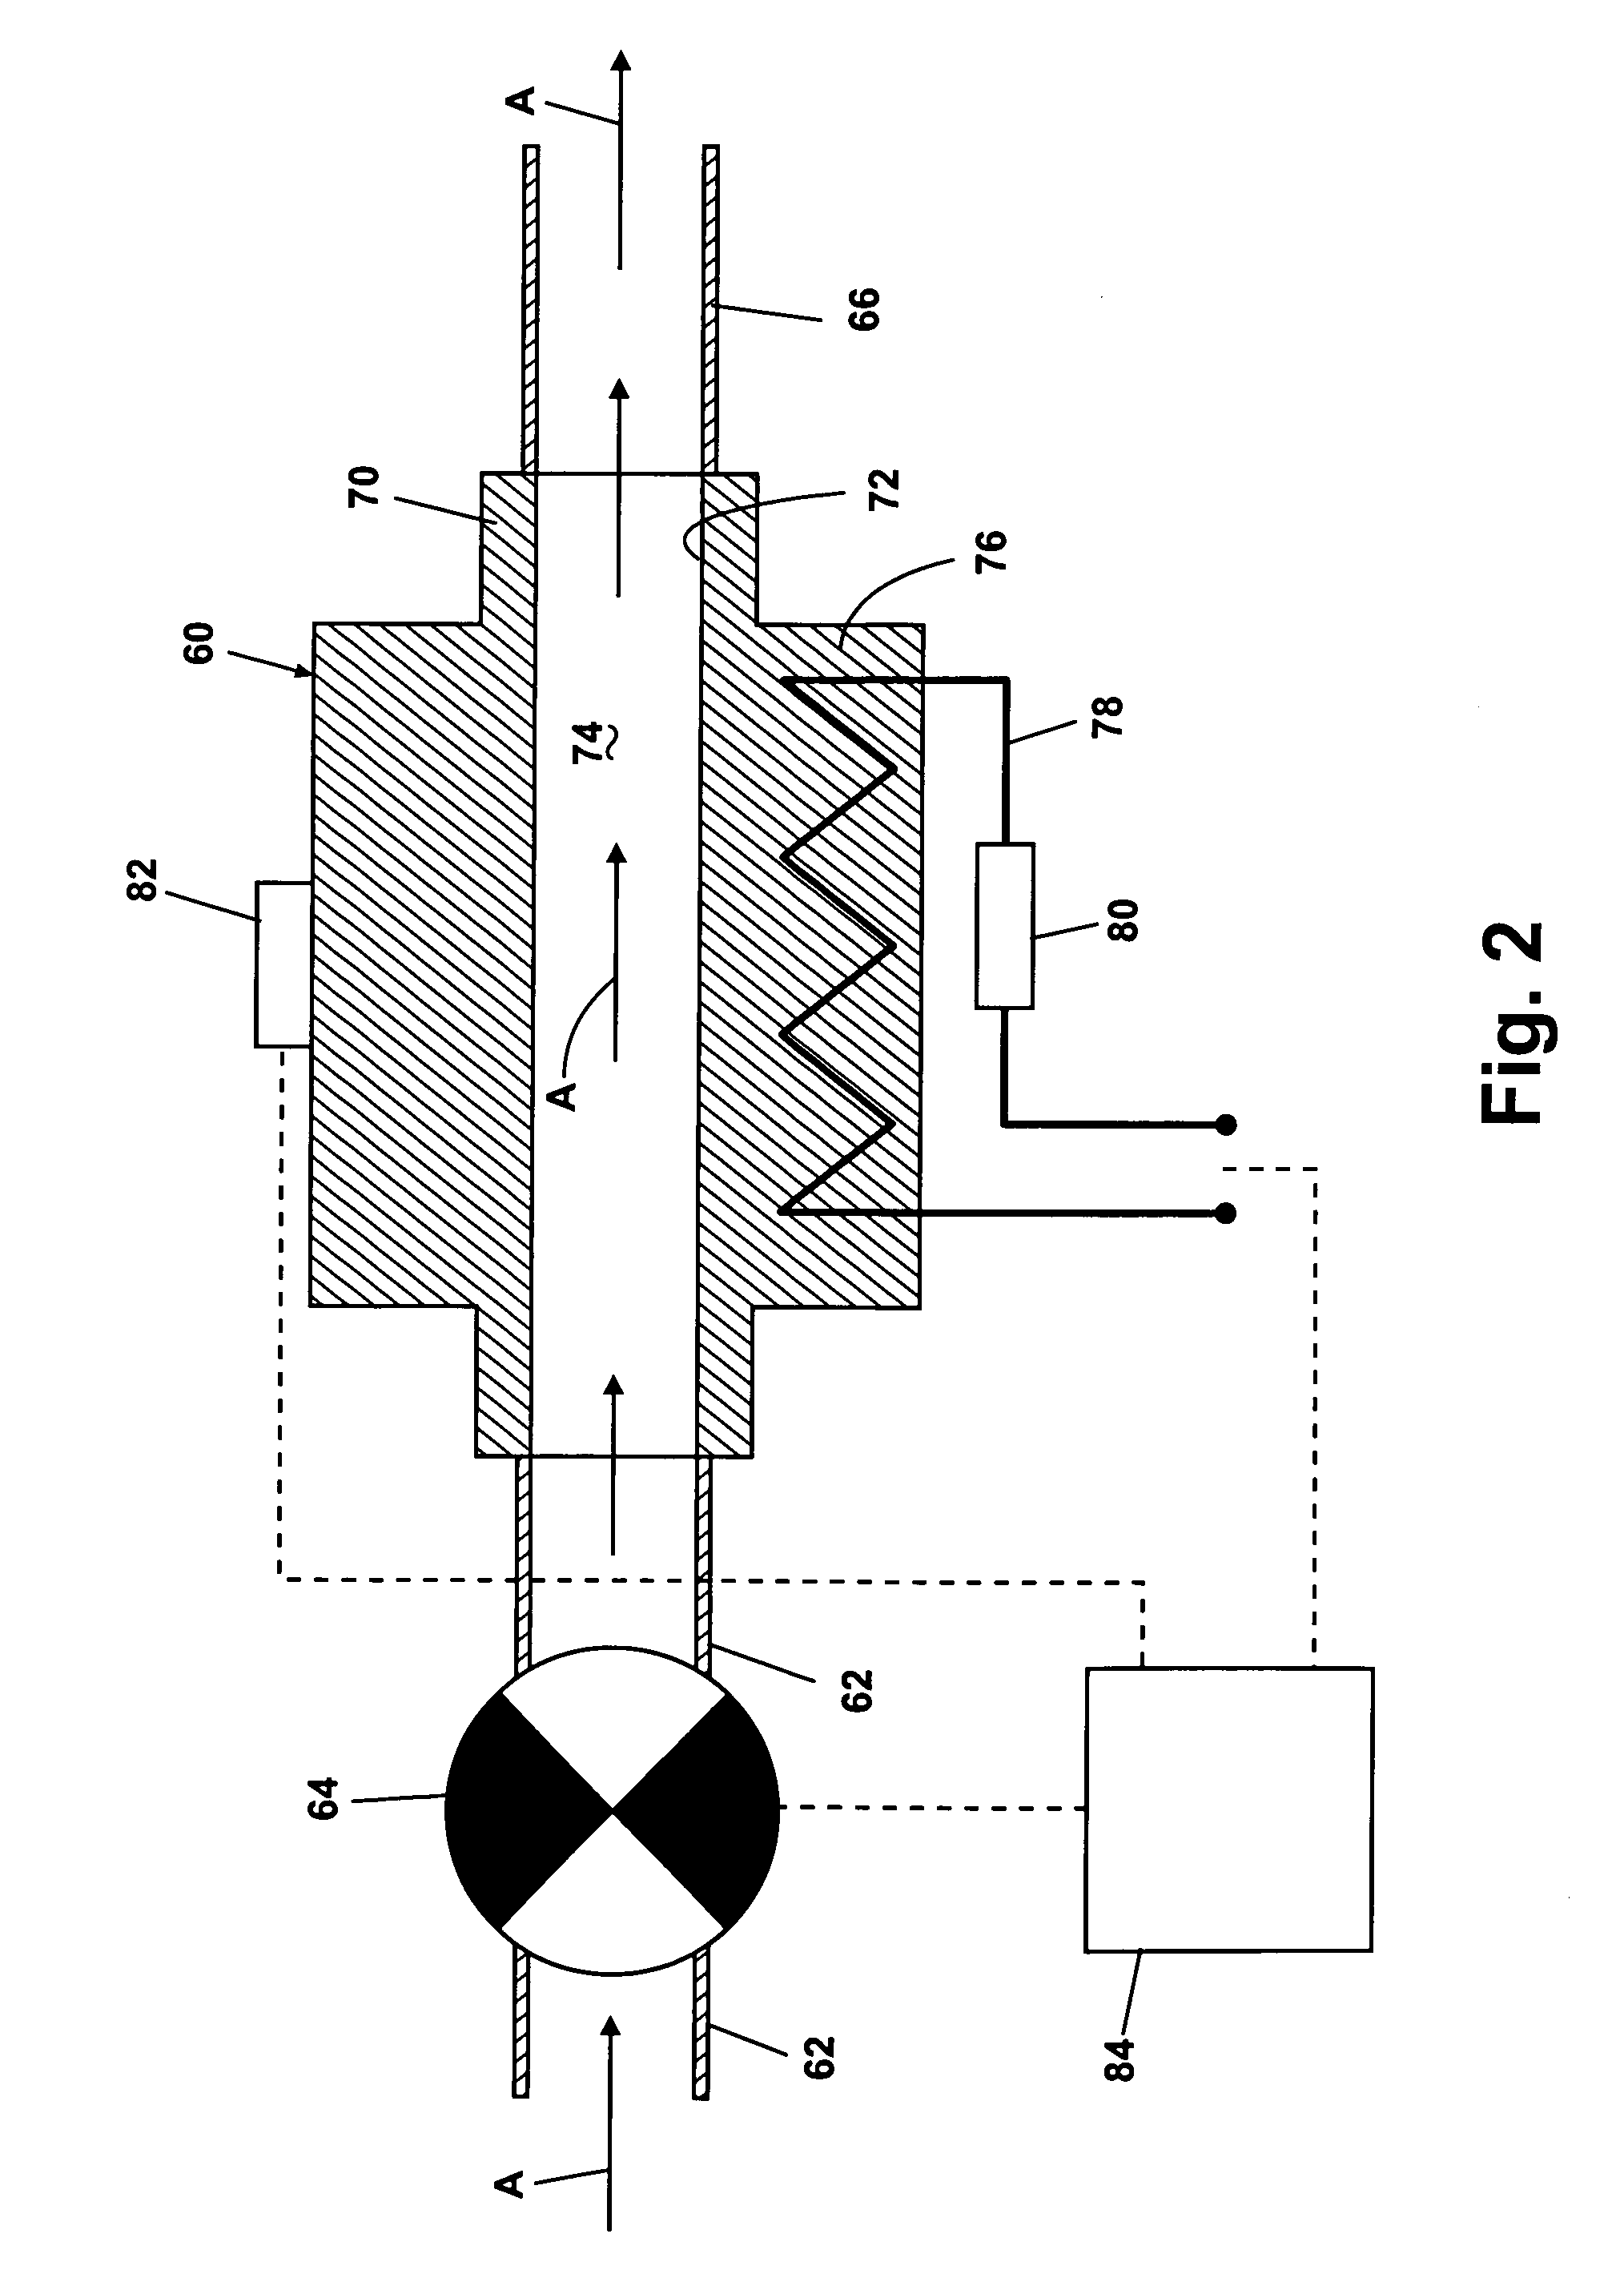 Removal of scale and sludge in a steam generator of a fabric treatment appliance